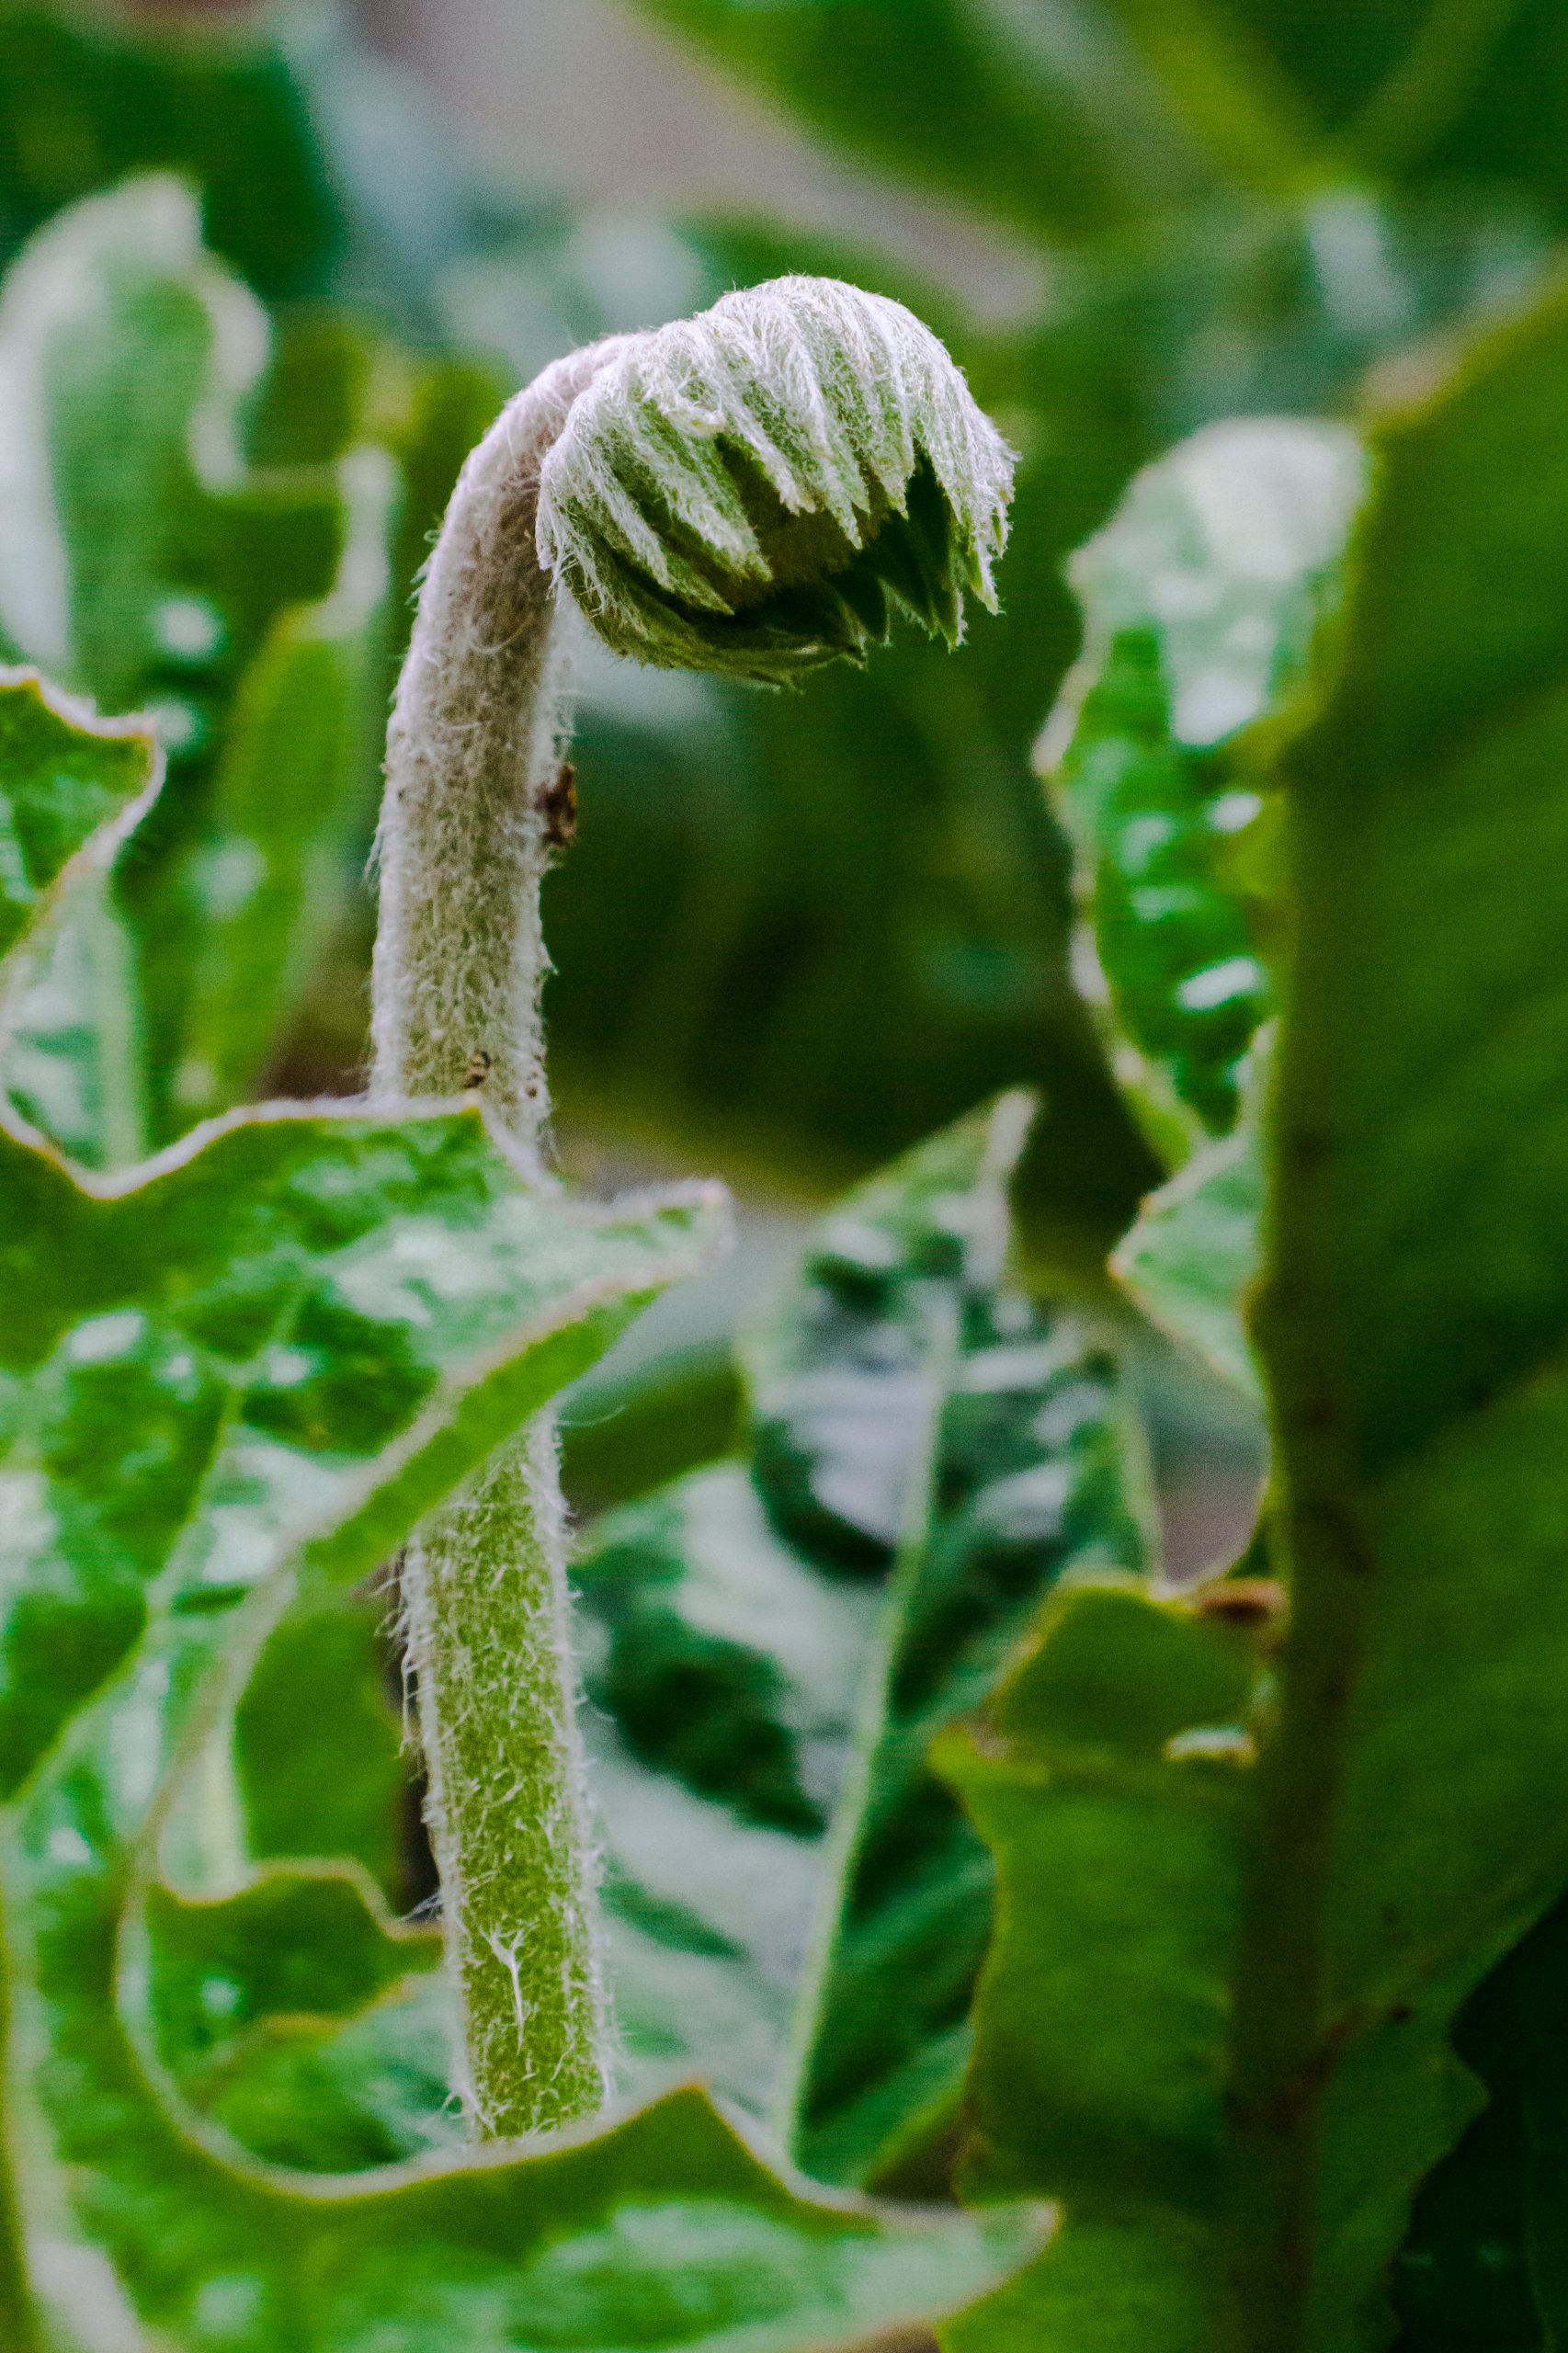 Young Flower bud